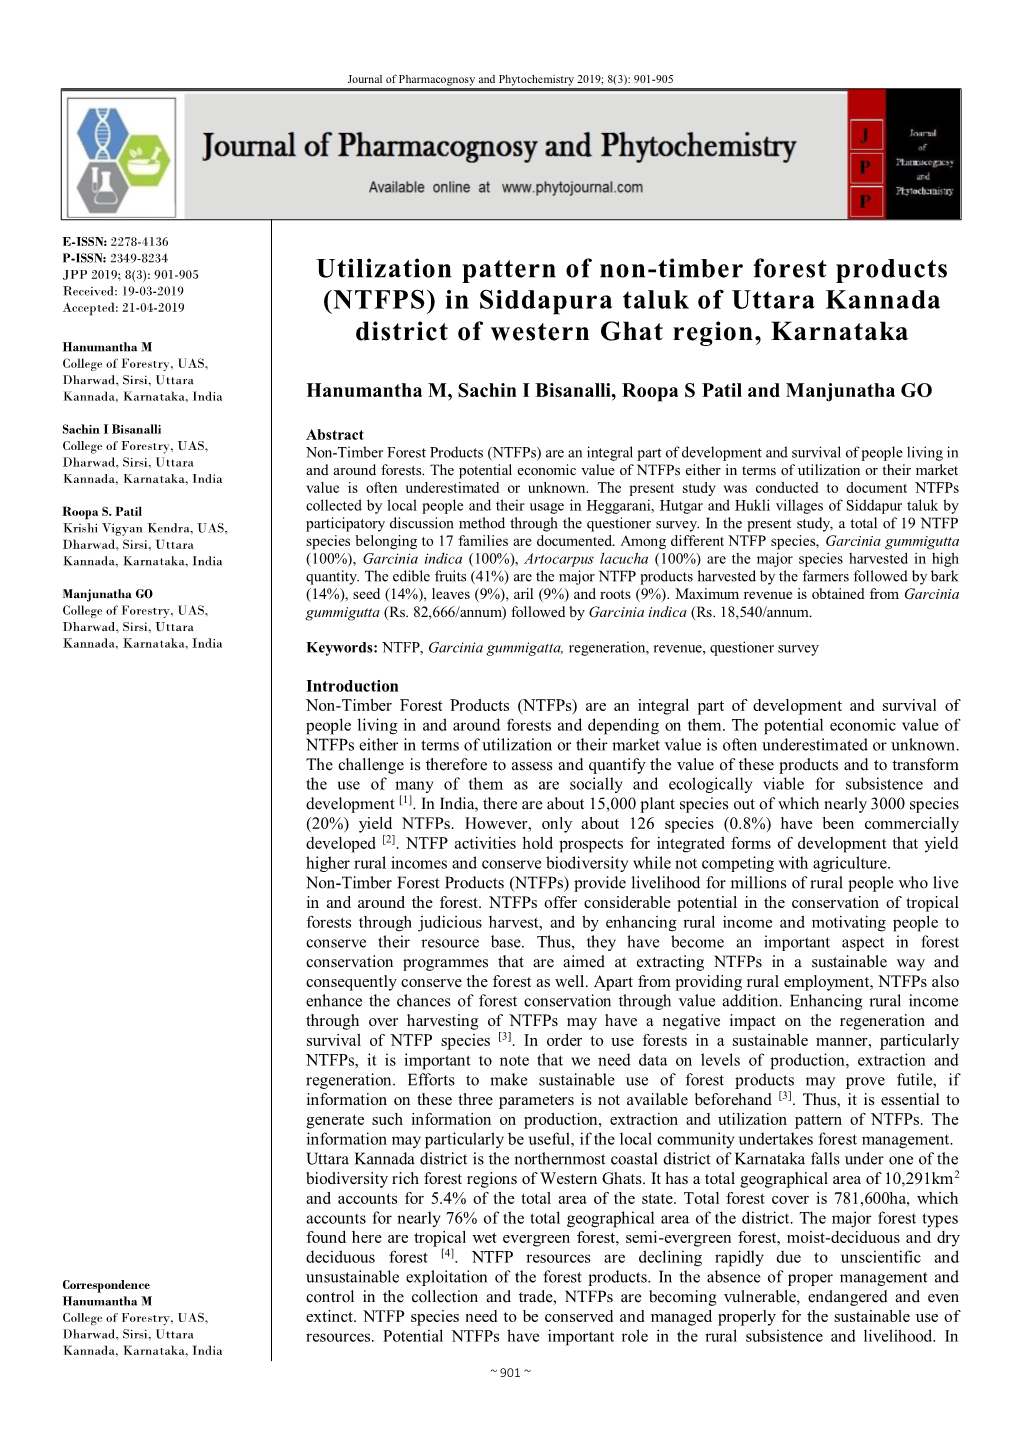 Utilization Pattern of Non-Timber Forest Products (NTFPS) in Siddapura